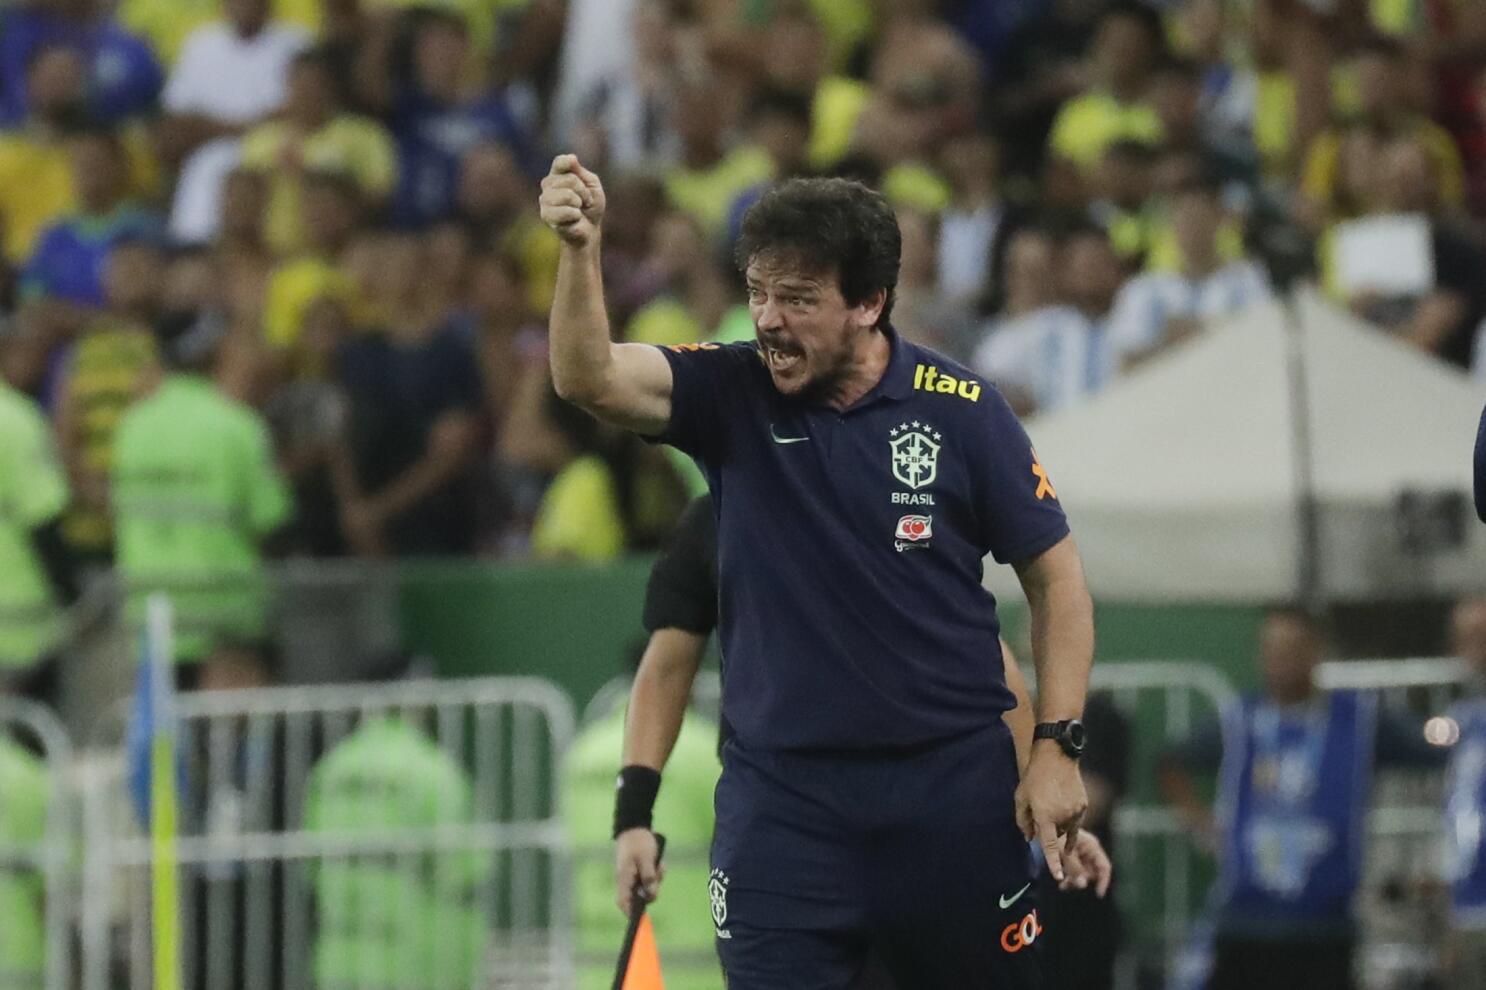 Brazil ends year in poor shape under interim coach as it waits for word  from Carlo Ancelotti